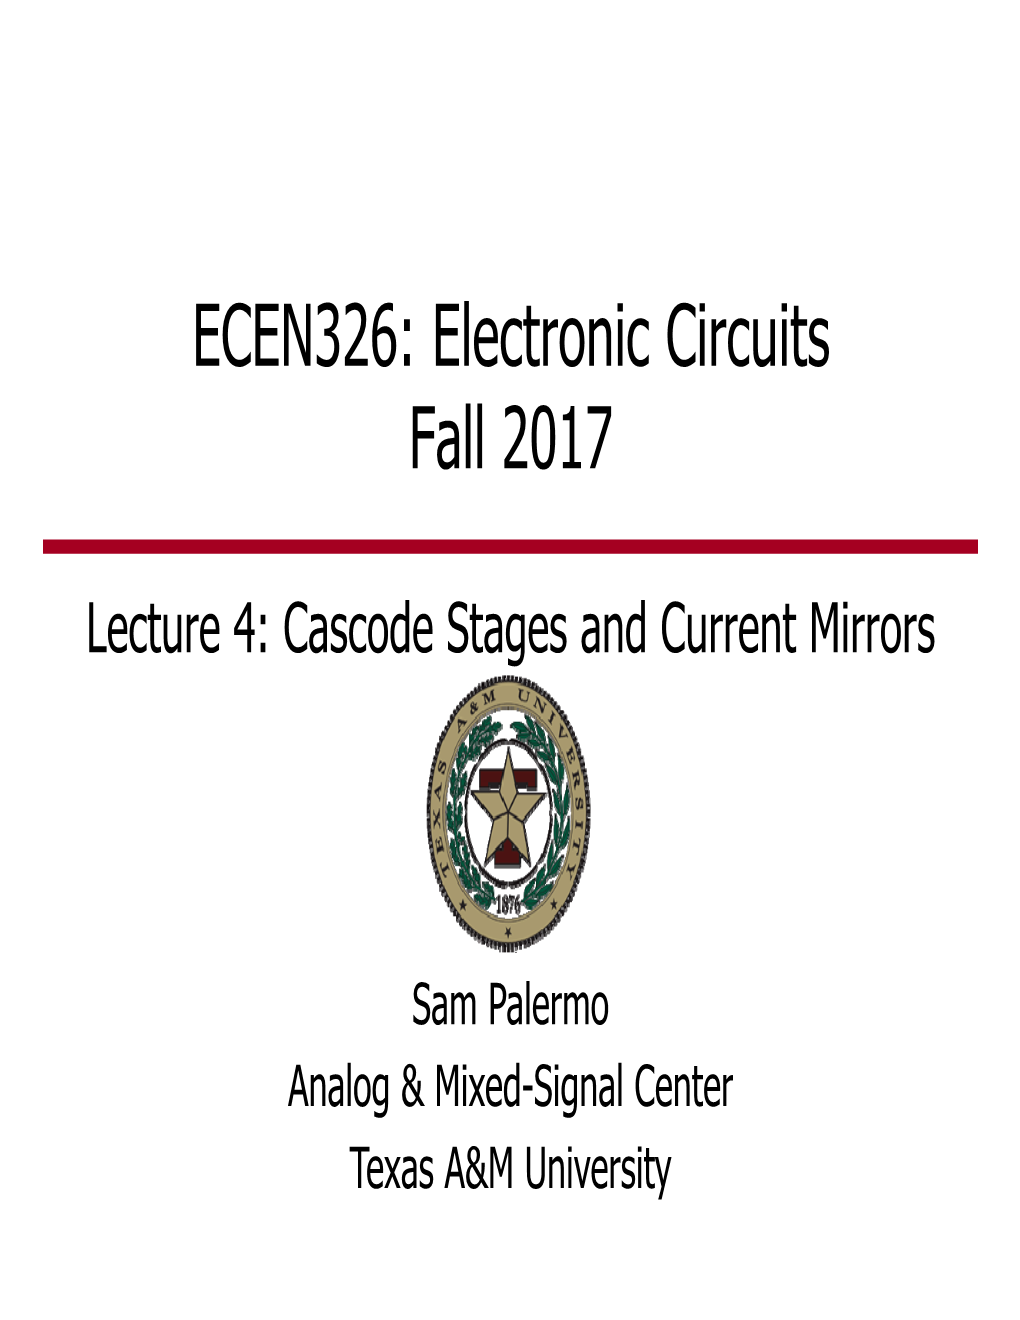 Lecture 4: Cascode Stages and Current Mirrors